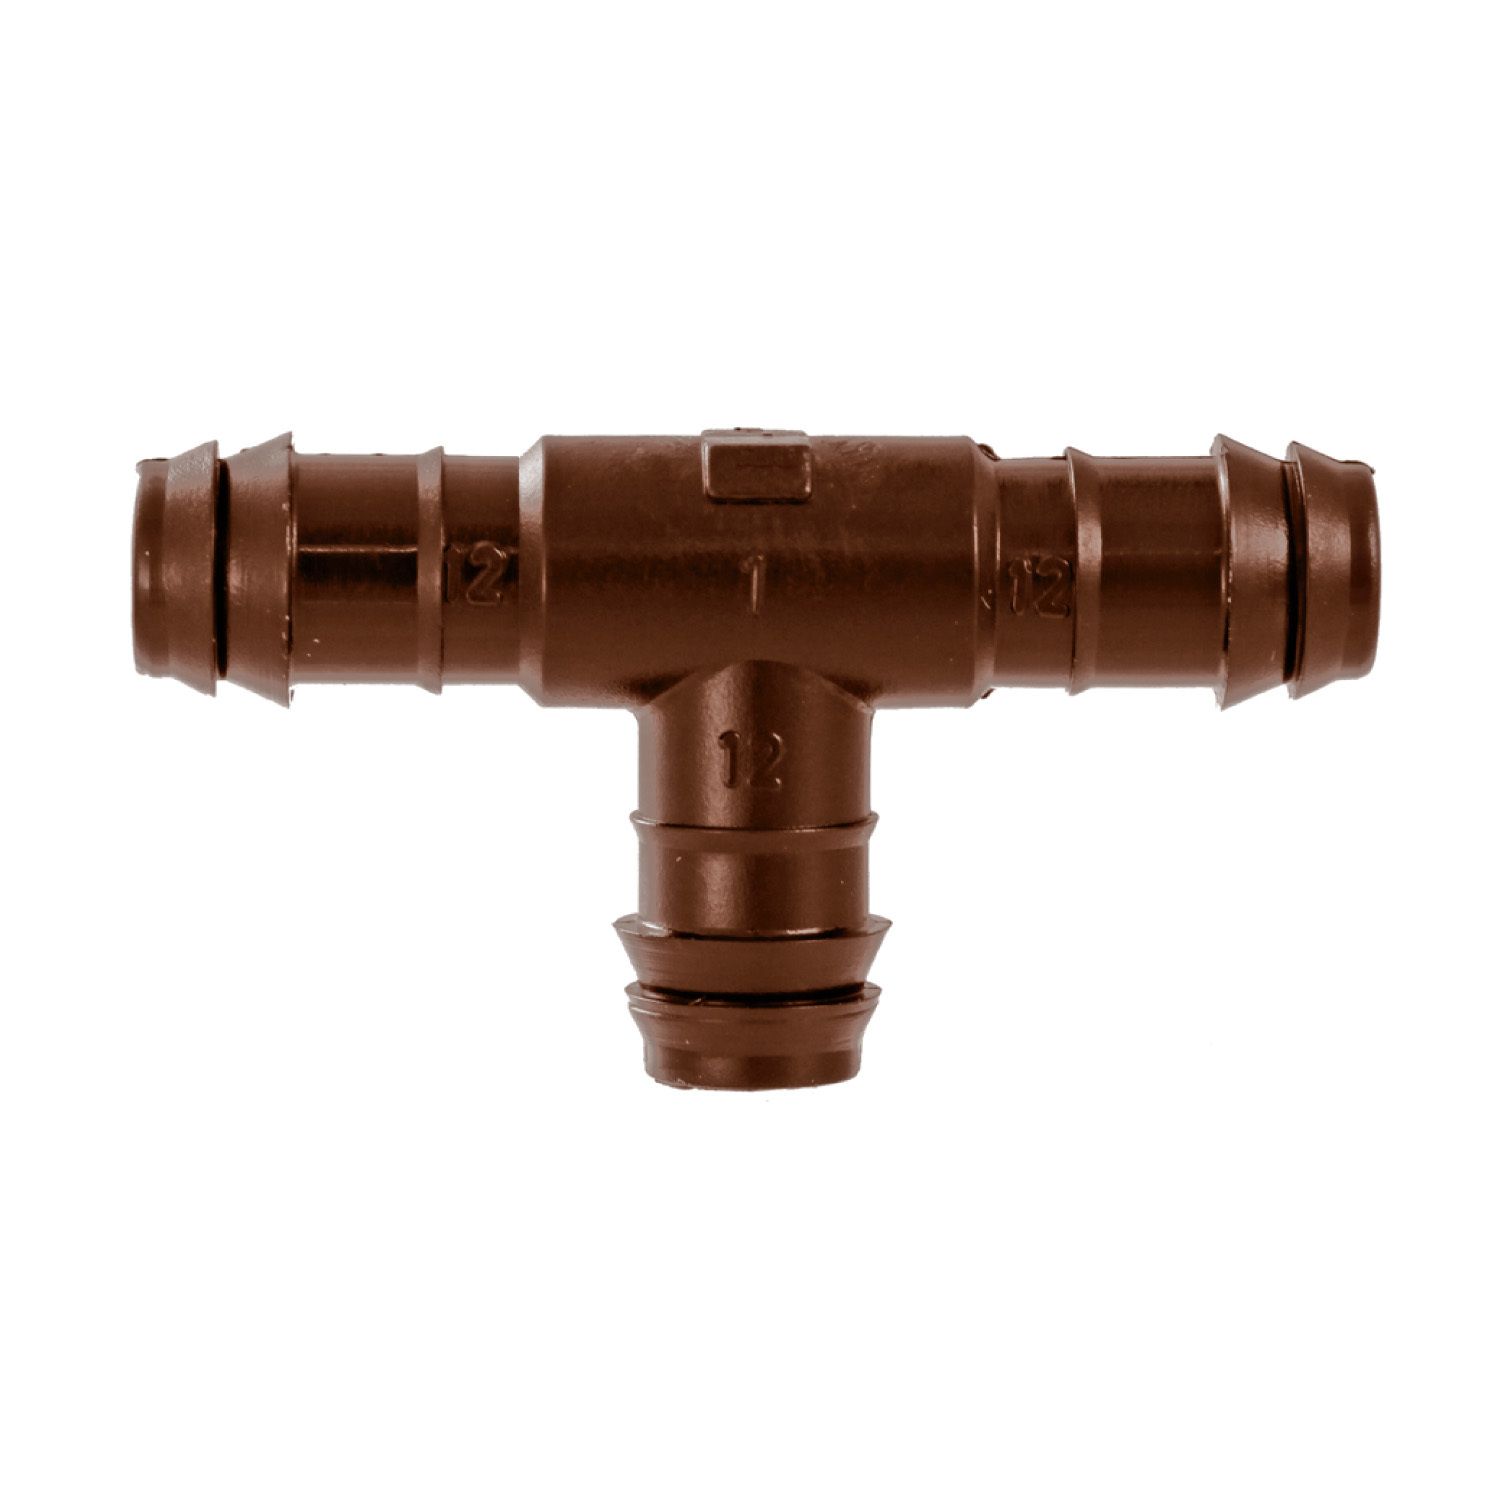 All about Garden Hose Fittings - DripWorks